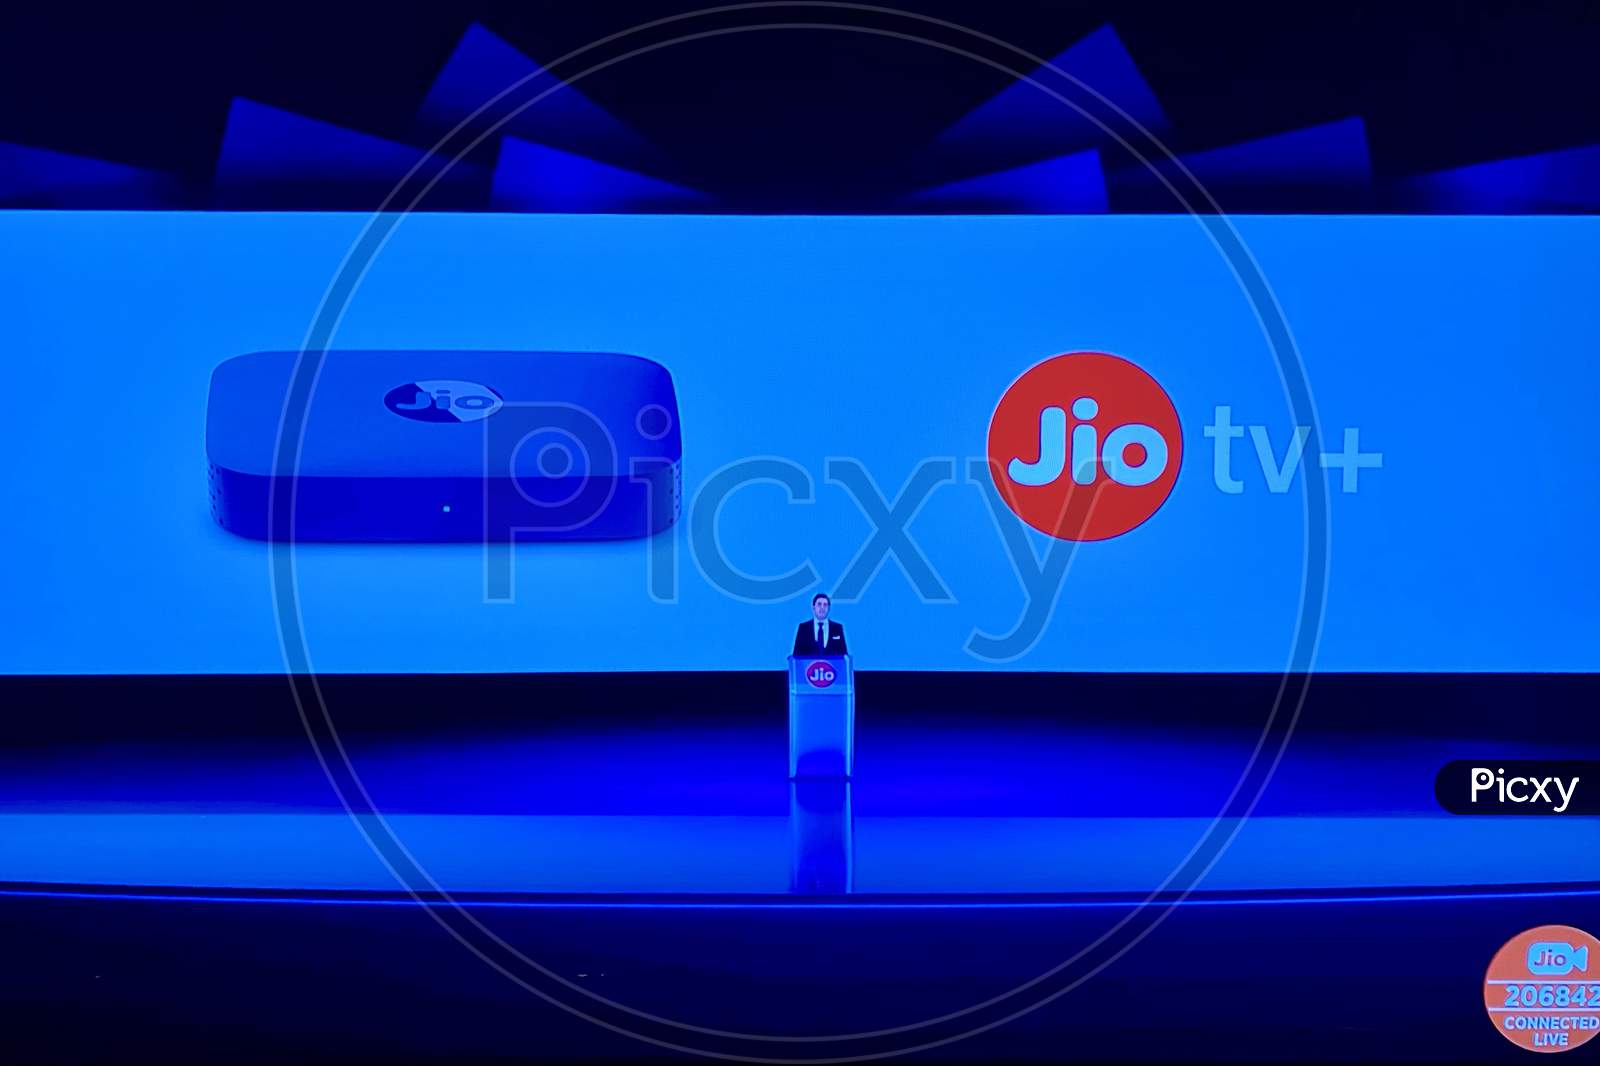 Reliance announcing Jio TV Plus in live presentation at 43rd Annual General Shareholders Meeting